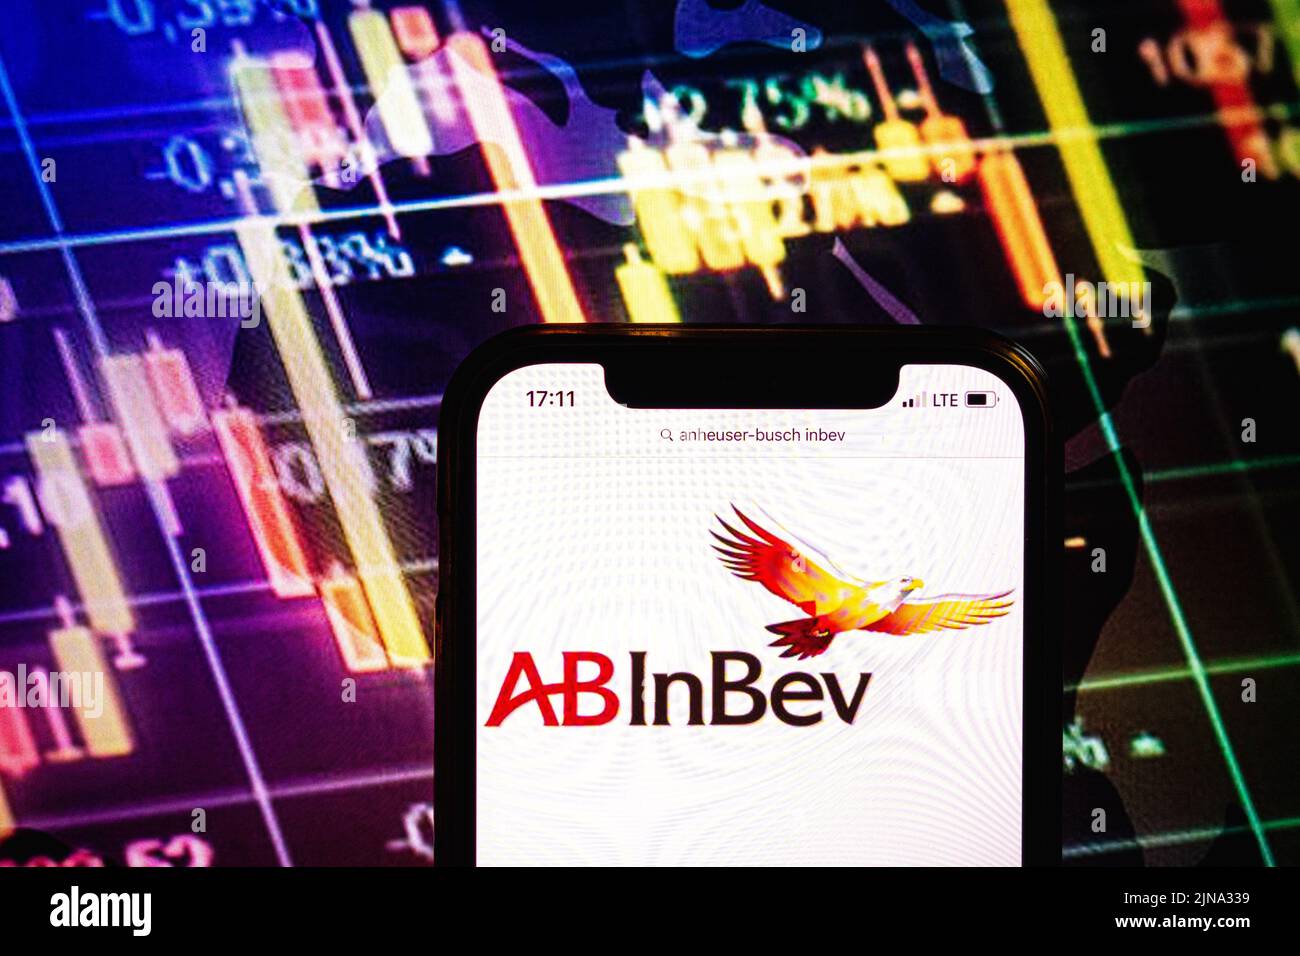 KONSKIE, POLAND - August 09, 2022: Smartphone displaying logo of Anheuser-Busch InBev company on stock exchange diagram background Stock Photo